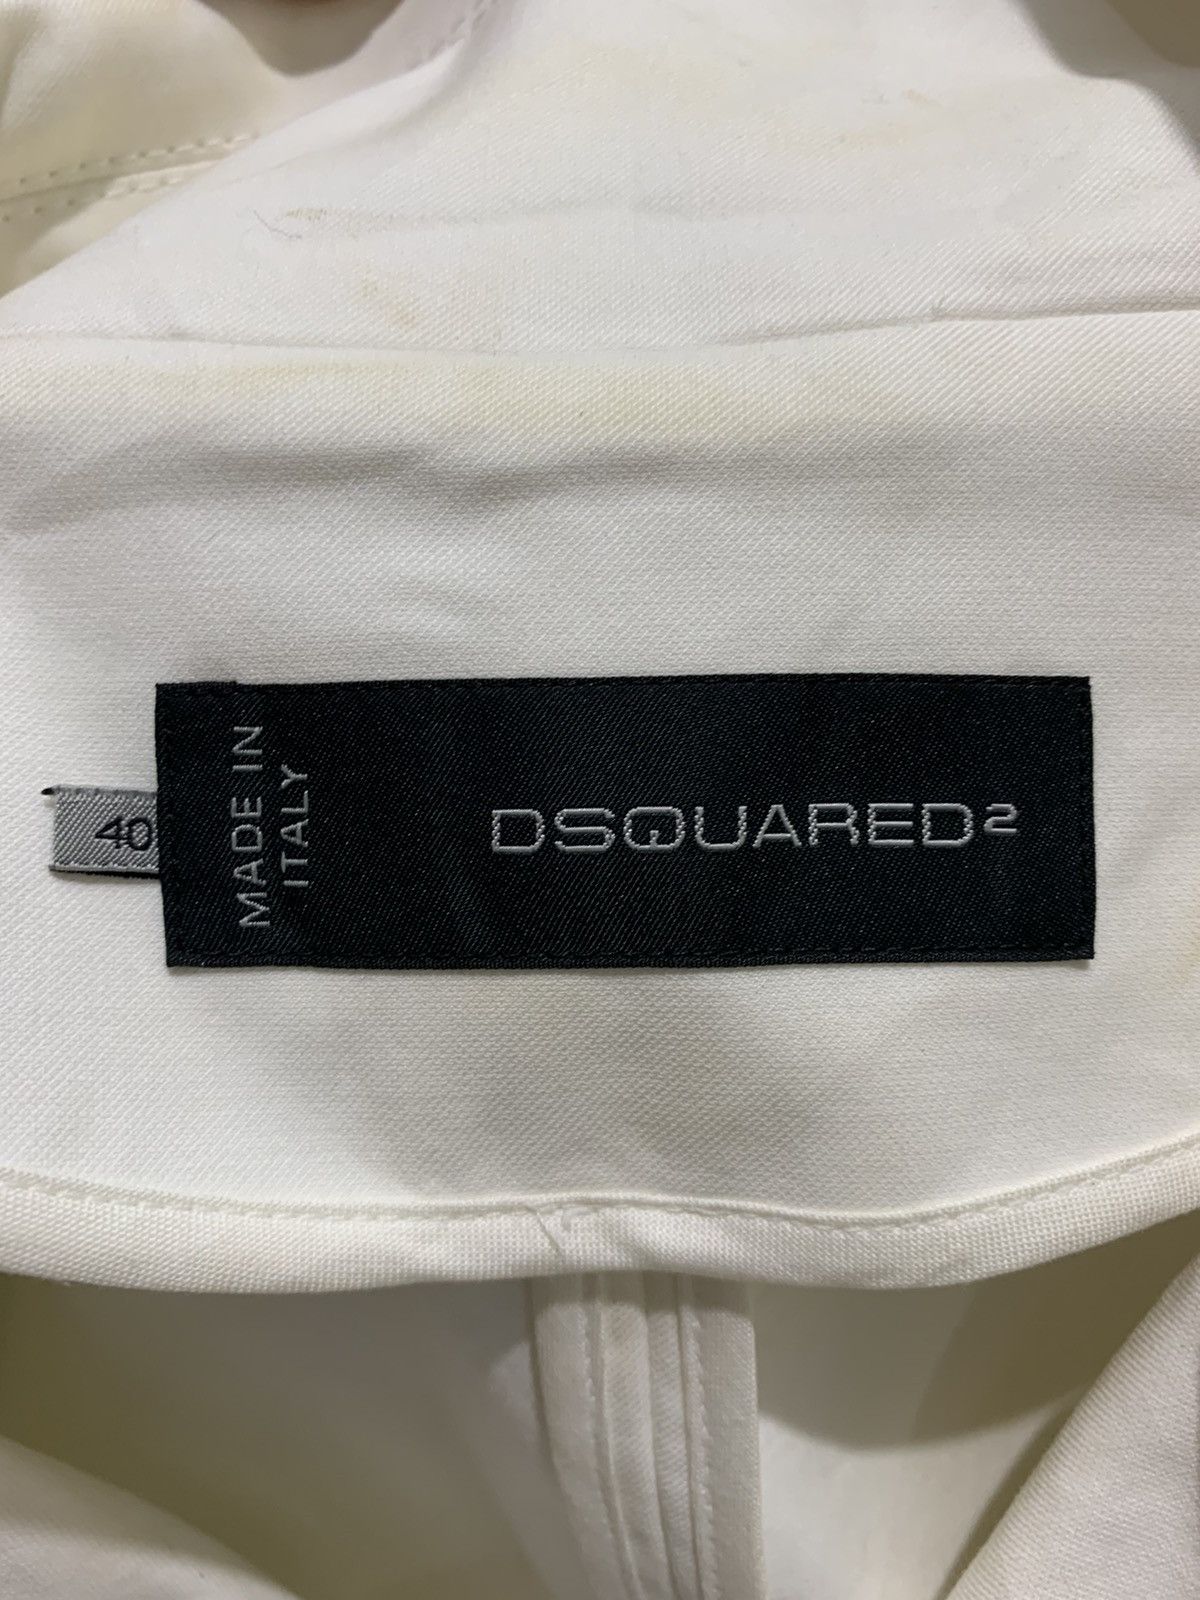 🔥DSQUARED2 DOUBLE BREAST JACKETS - 11